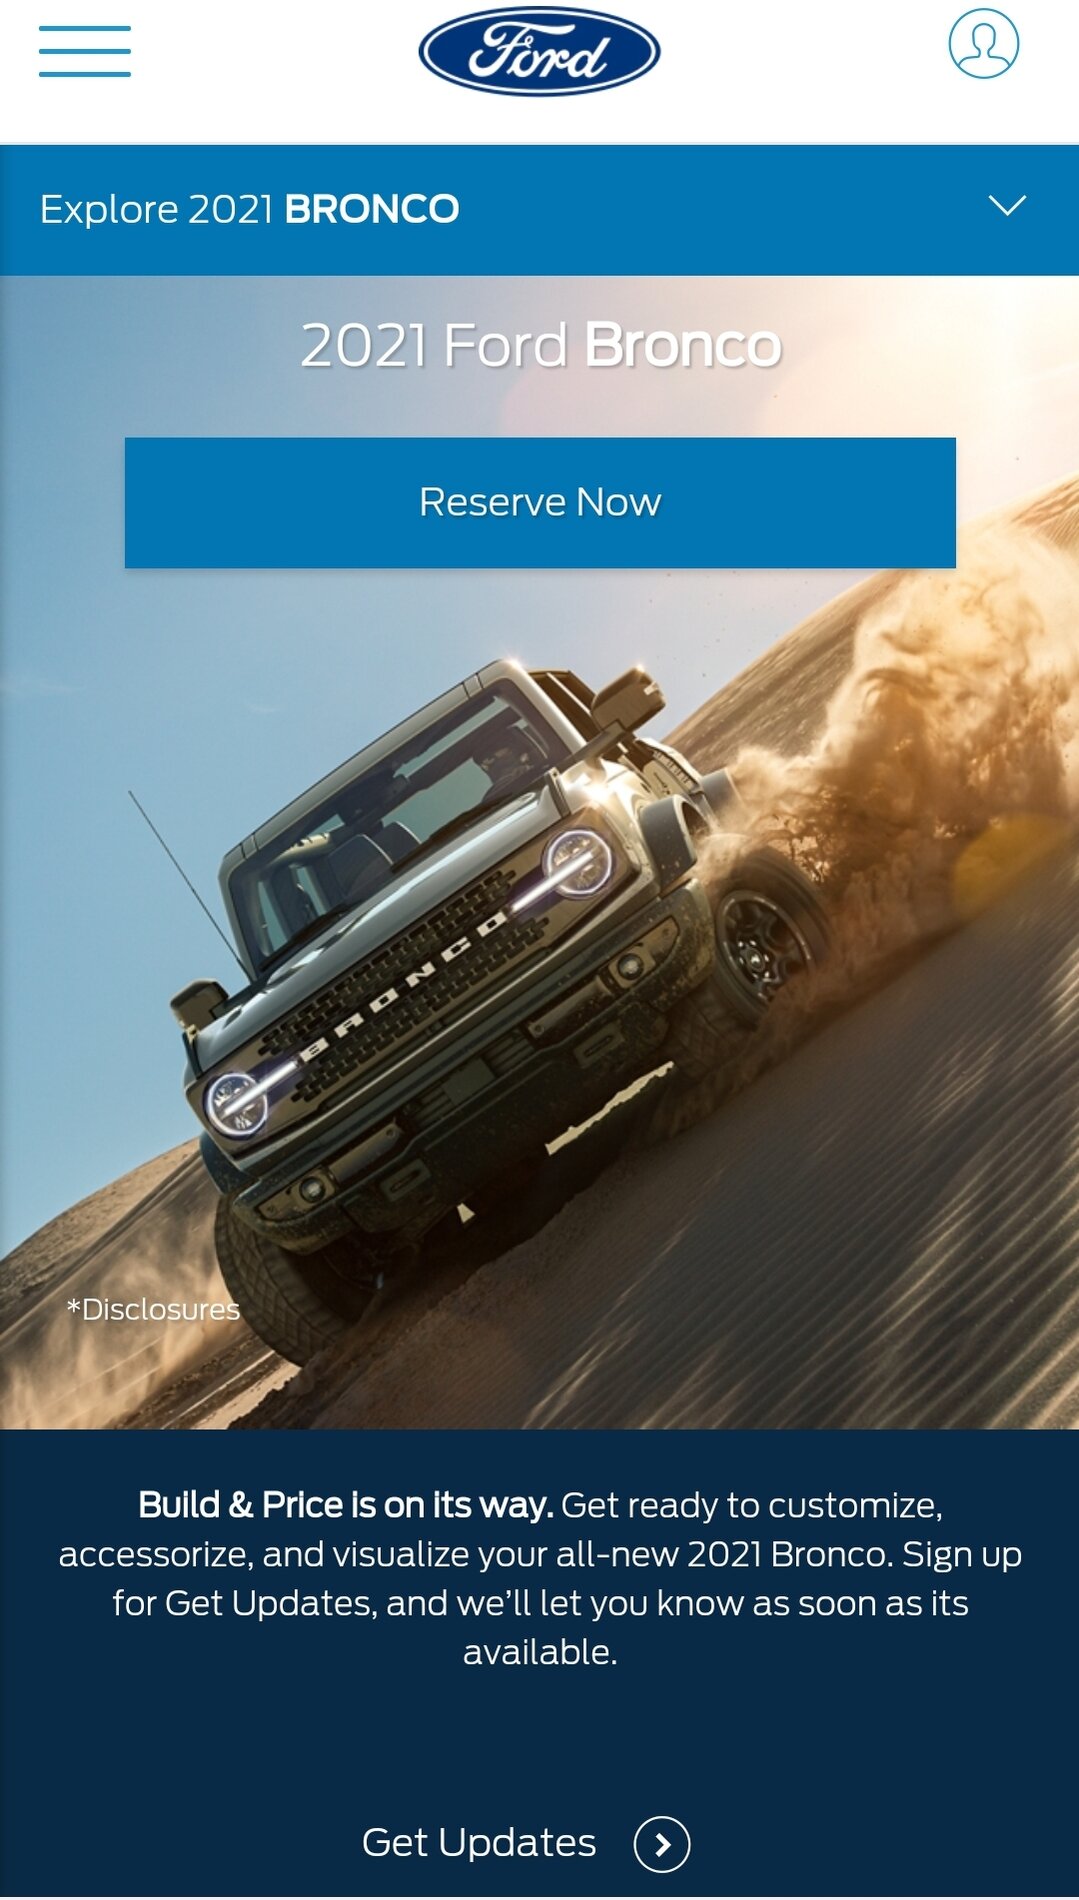 Ford Bronco Interesting Thought on Release, B&P, and Launch/Production Screenshot_20200910-140201_Facebook